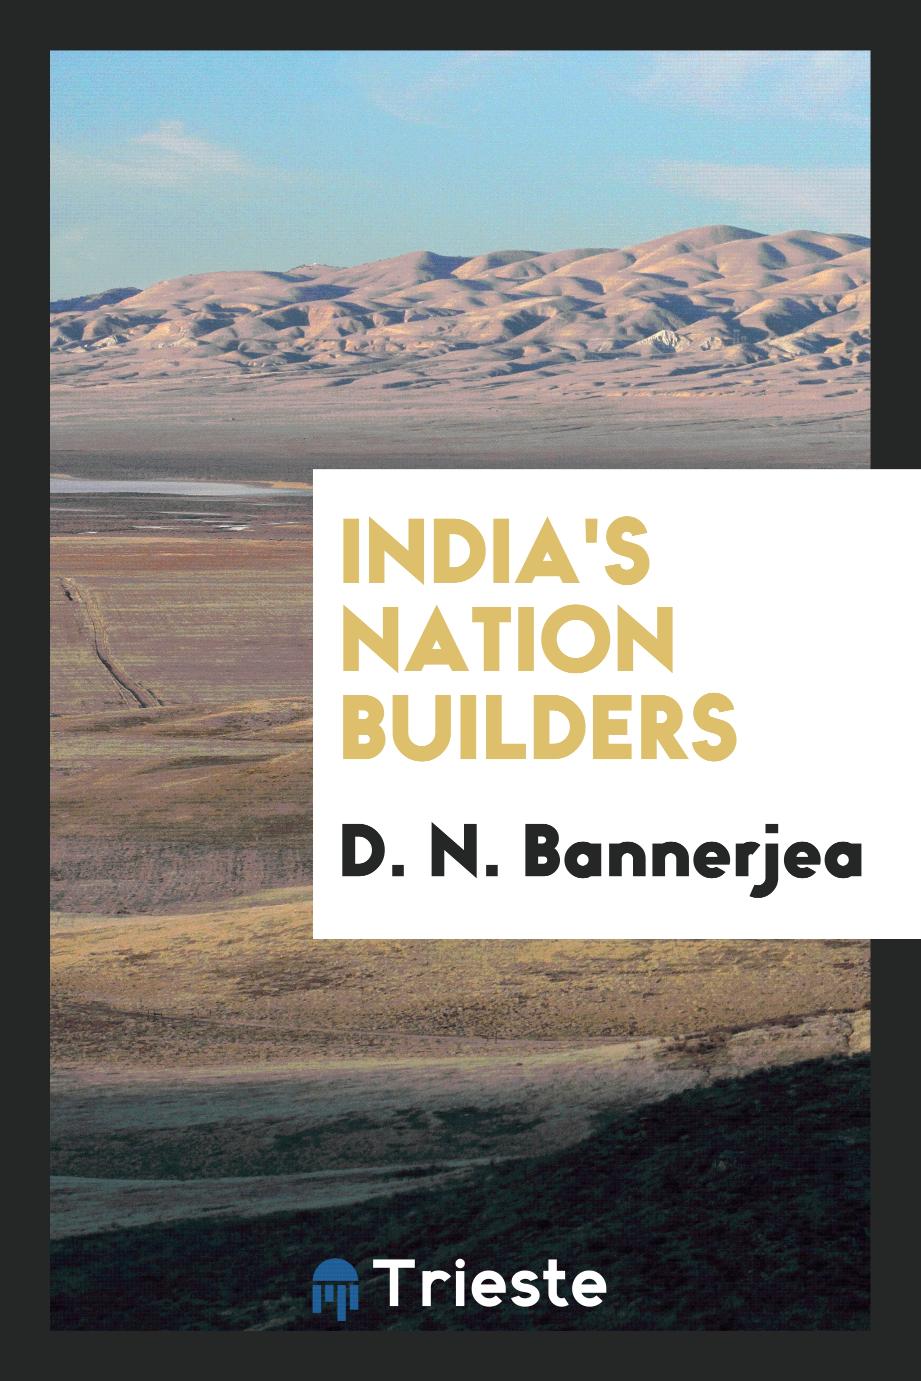 India's nation builders